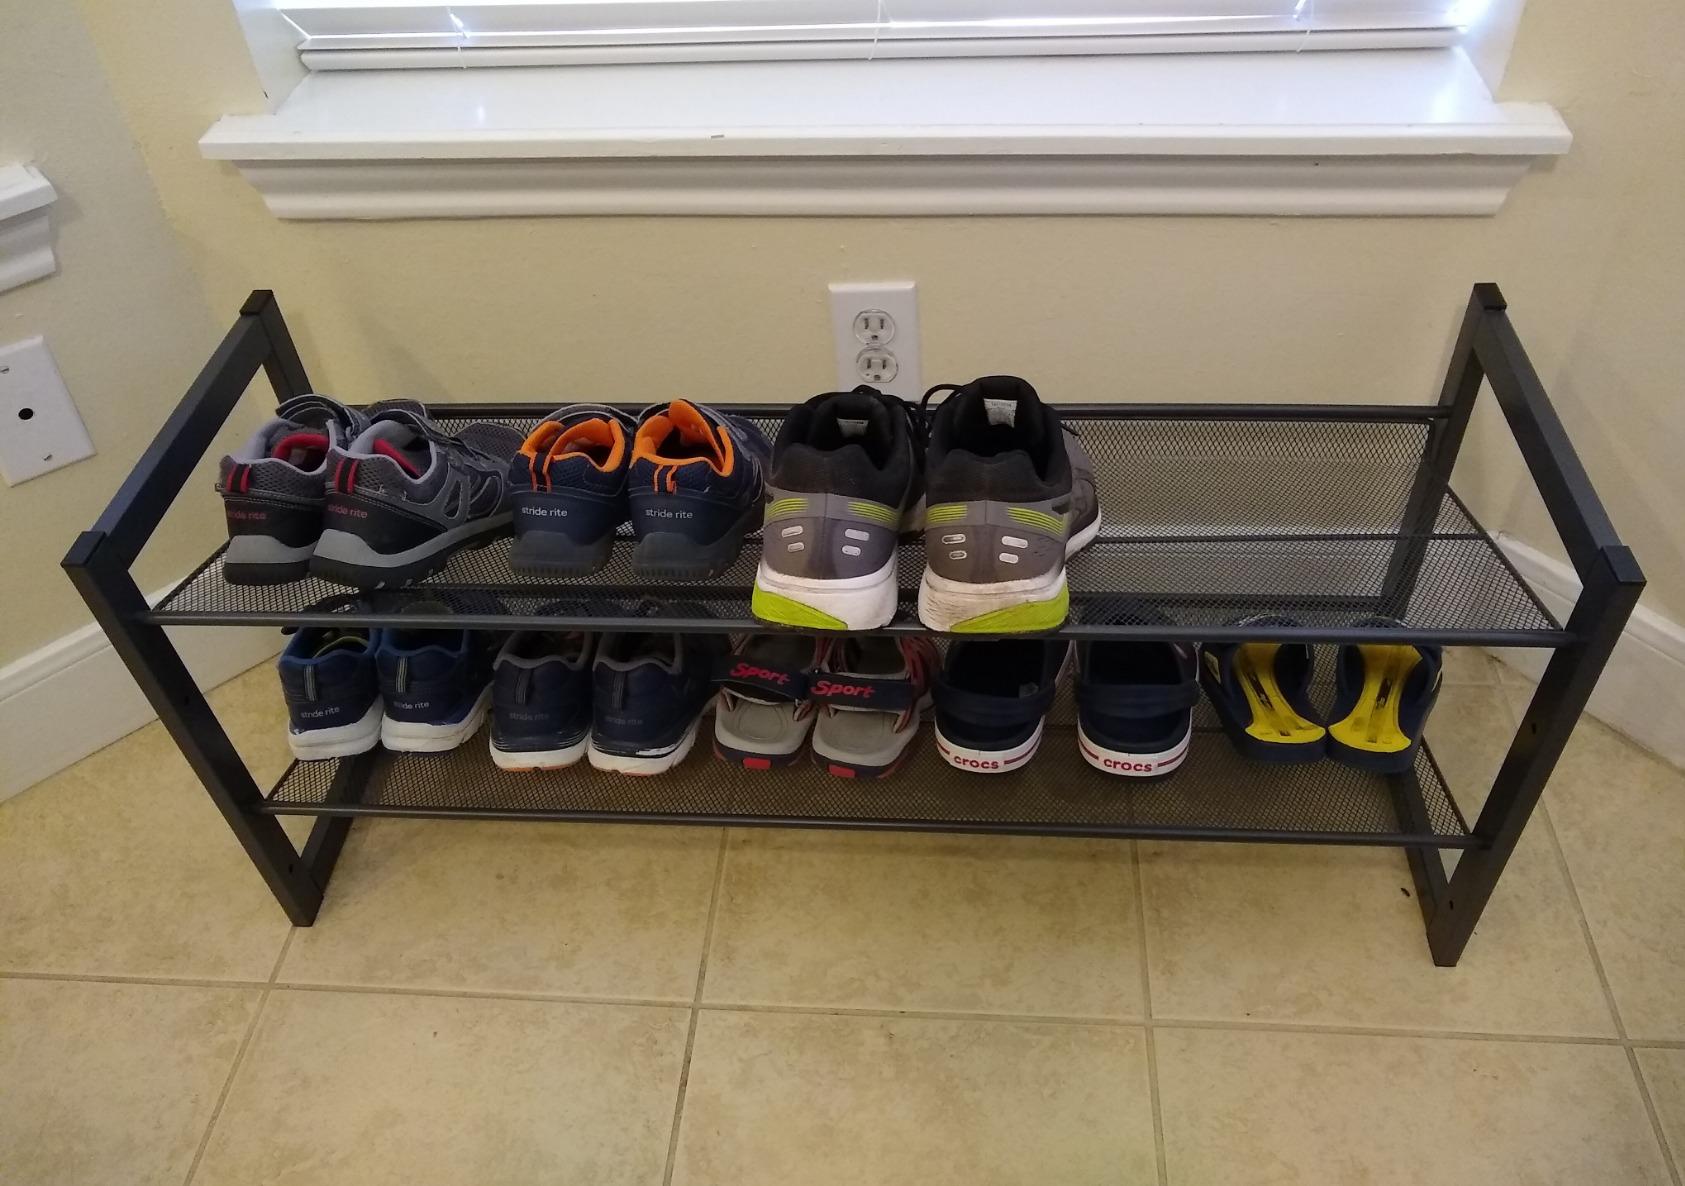 Shoe Rack, 2-Tier Stackable Shoe Storage Shelf, Metal Mesh, Flat or Angled Shoe Organizer for 8 to 10 Pairs of Shoes